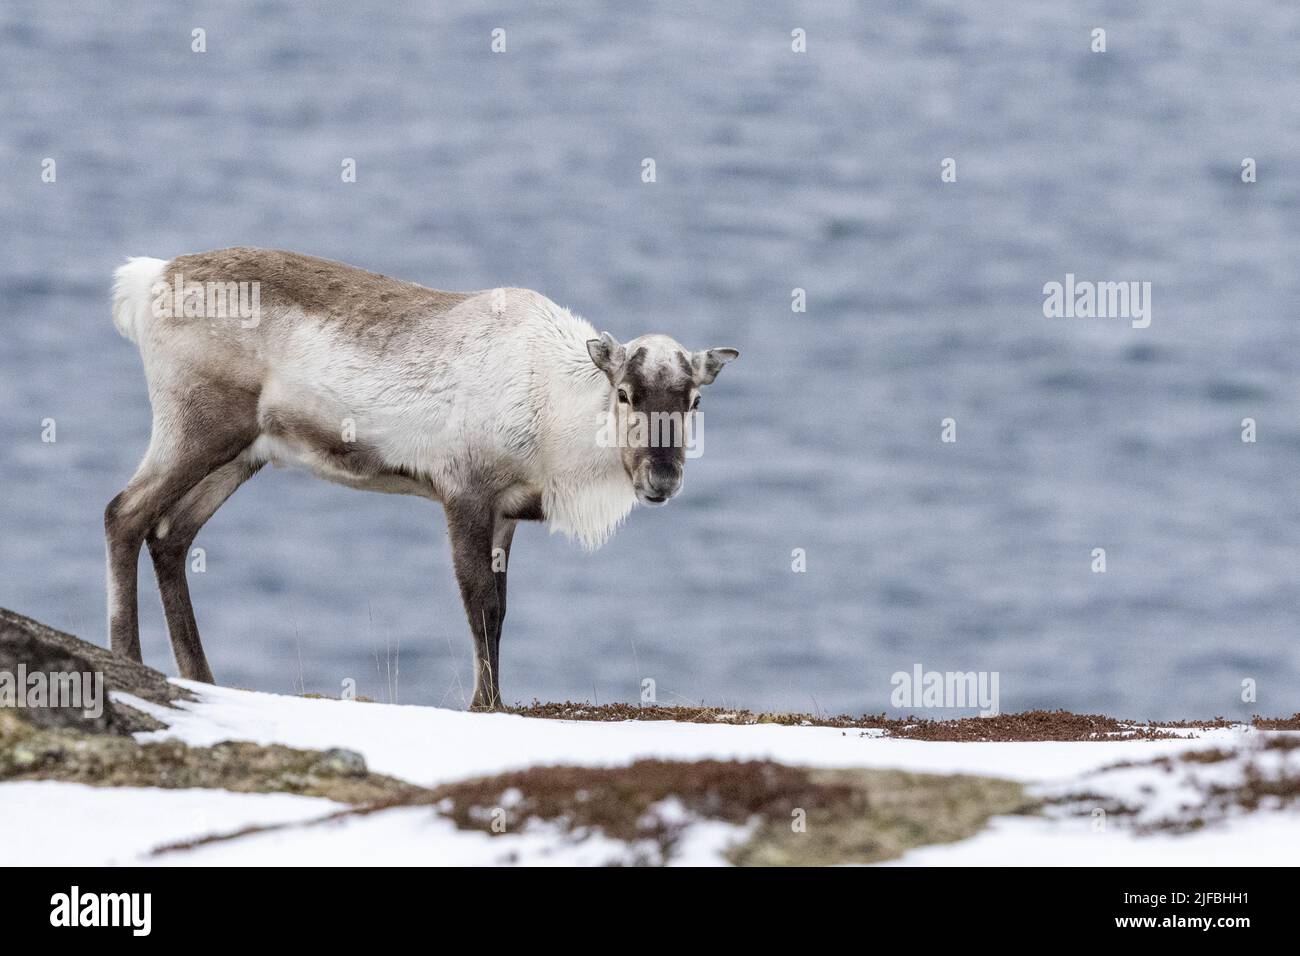 Norway, Varanger Fjord, Vadso, Reindeer (Rangifer tarandus), called Caribou in Canada, searches for food on plowed rocks Stock Photo